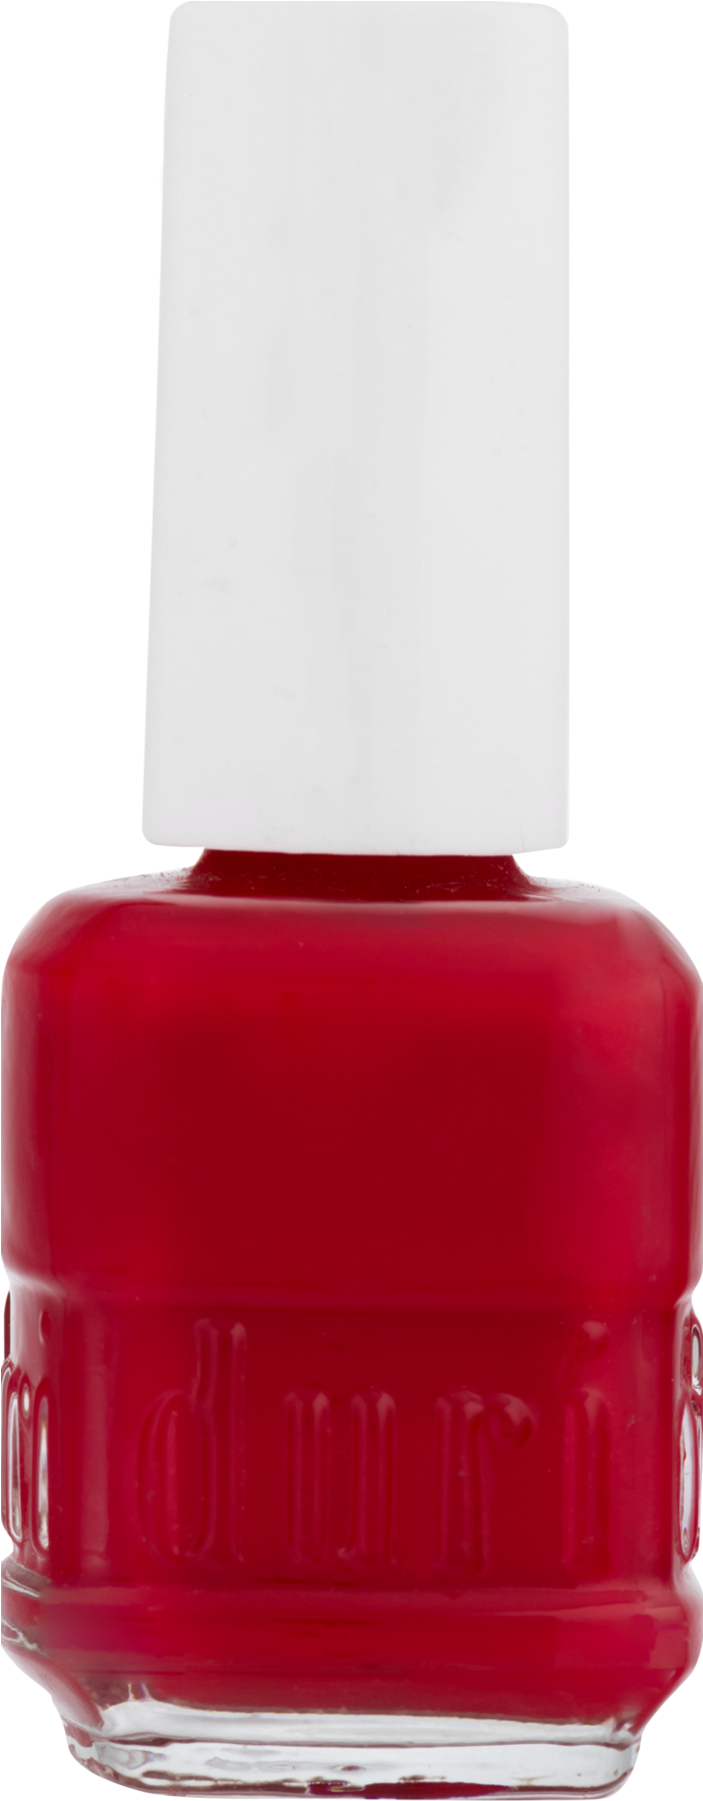 Classic Red Nail Polish Bottle PNG